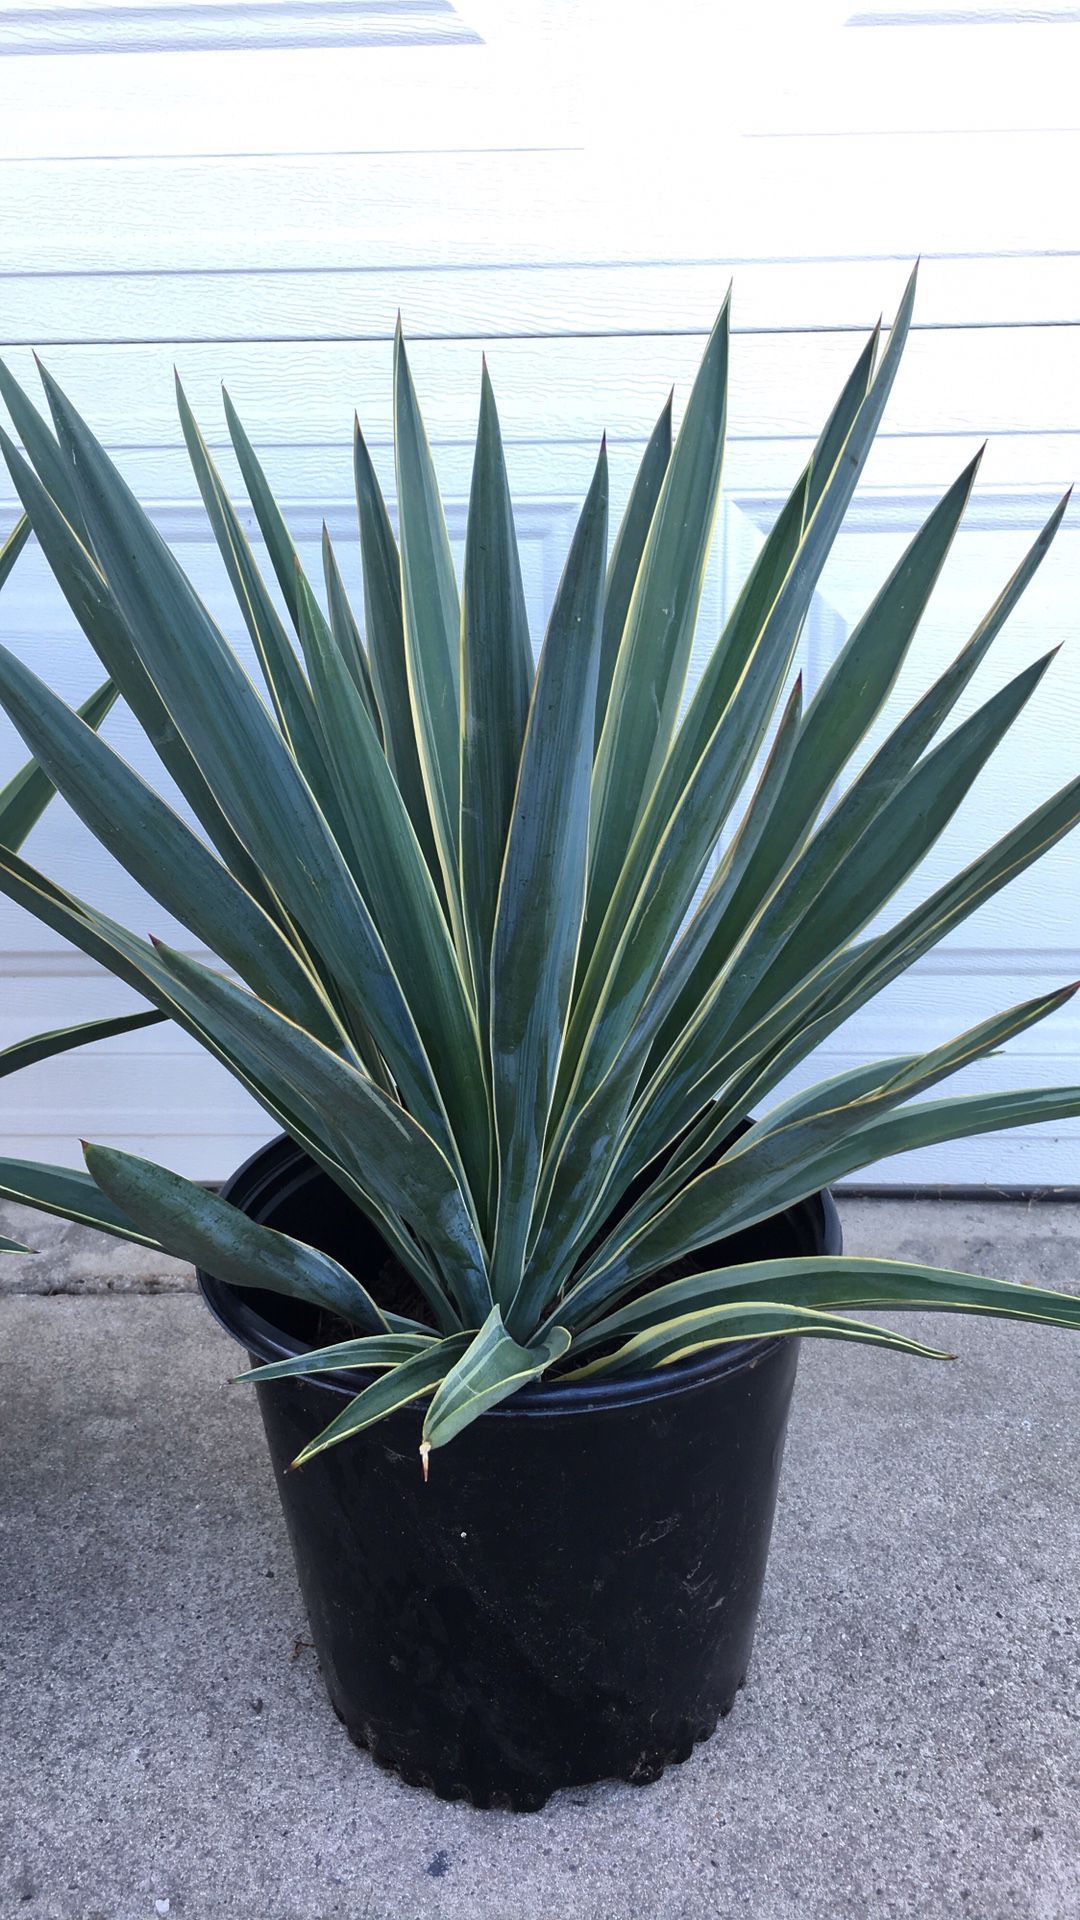 Big 🌱Tall🌱Healthy 🌱and Beautiful Agaves in 2 gallon containers - $15 each - Valued $24.99 each - Outdoor Plant - Less water